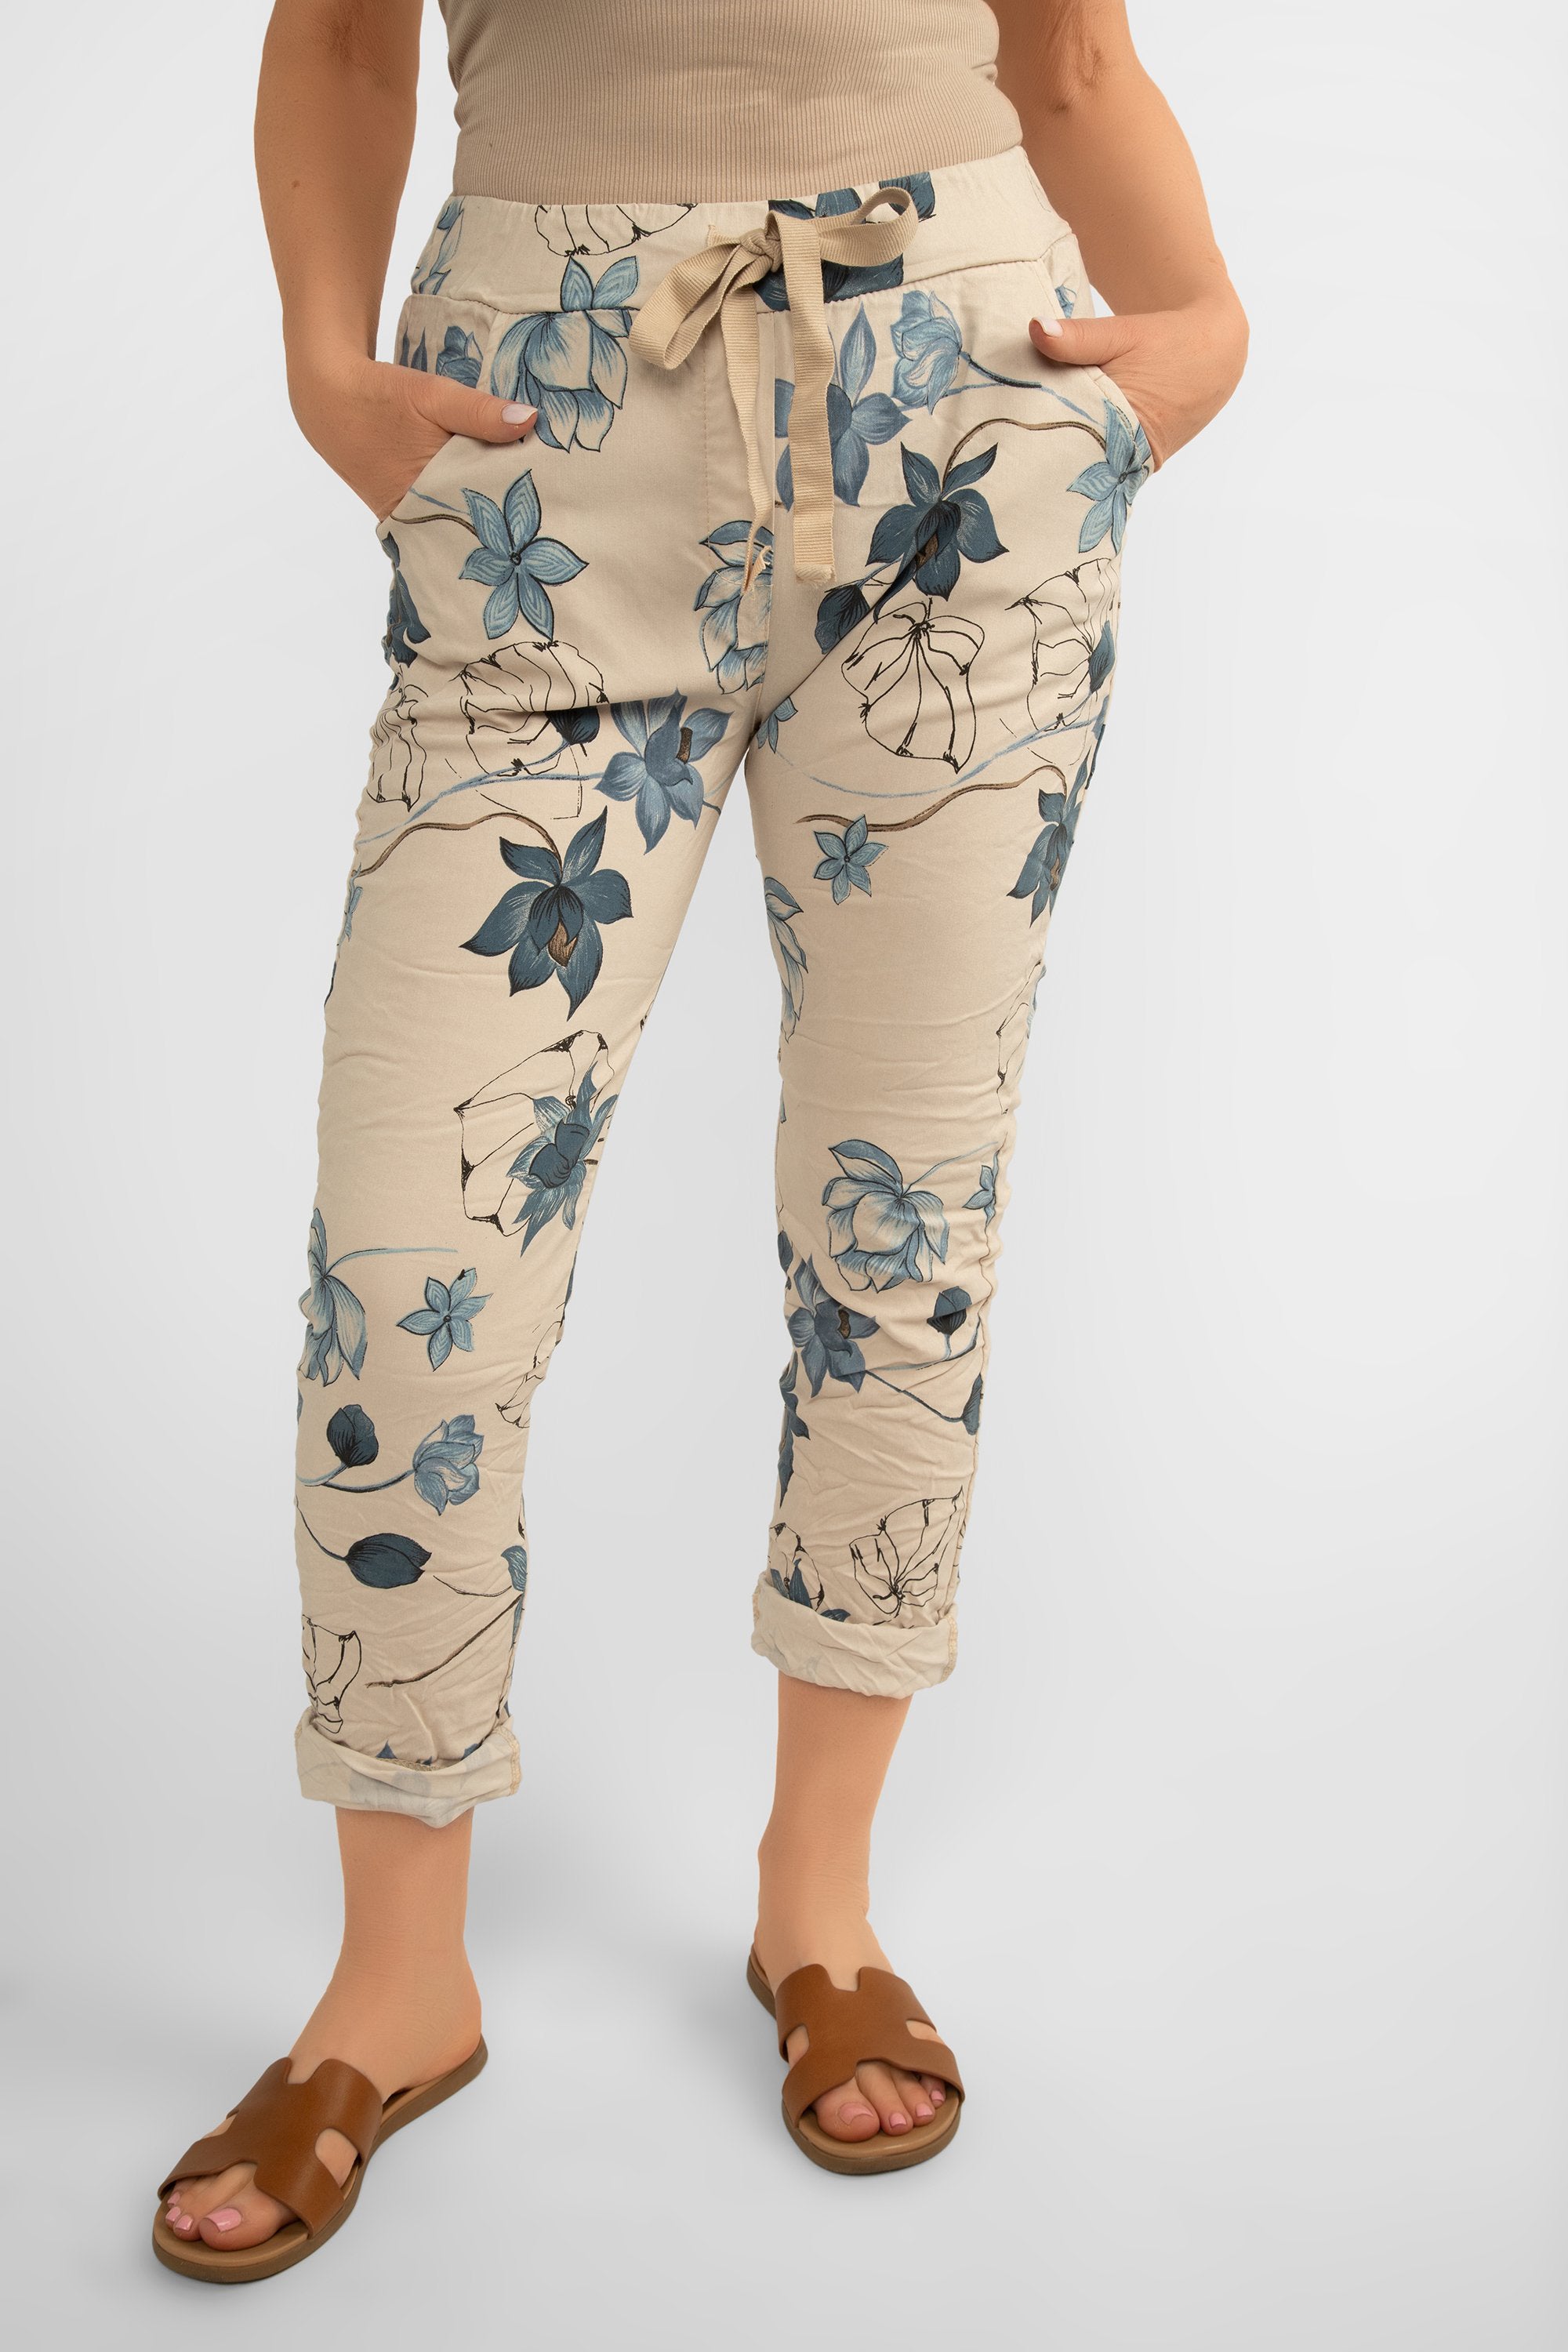 Bella Amore (21036) Women's Pull On Crinkle Pants with Side Pockets, Rolled Hem, and Blue Lotus Flower Print in Beige